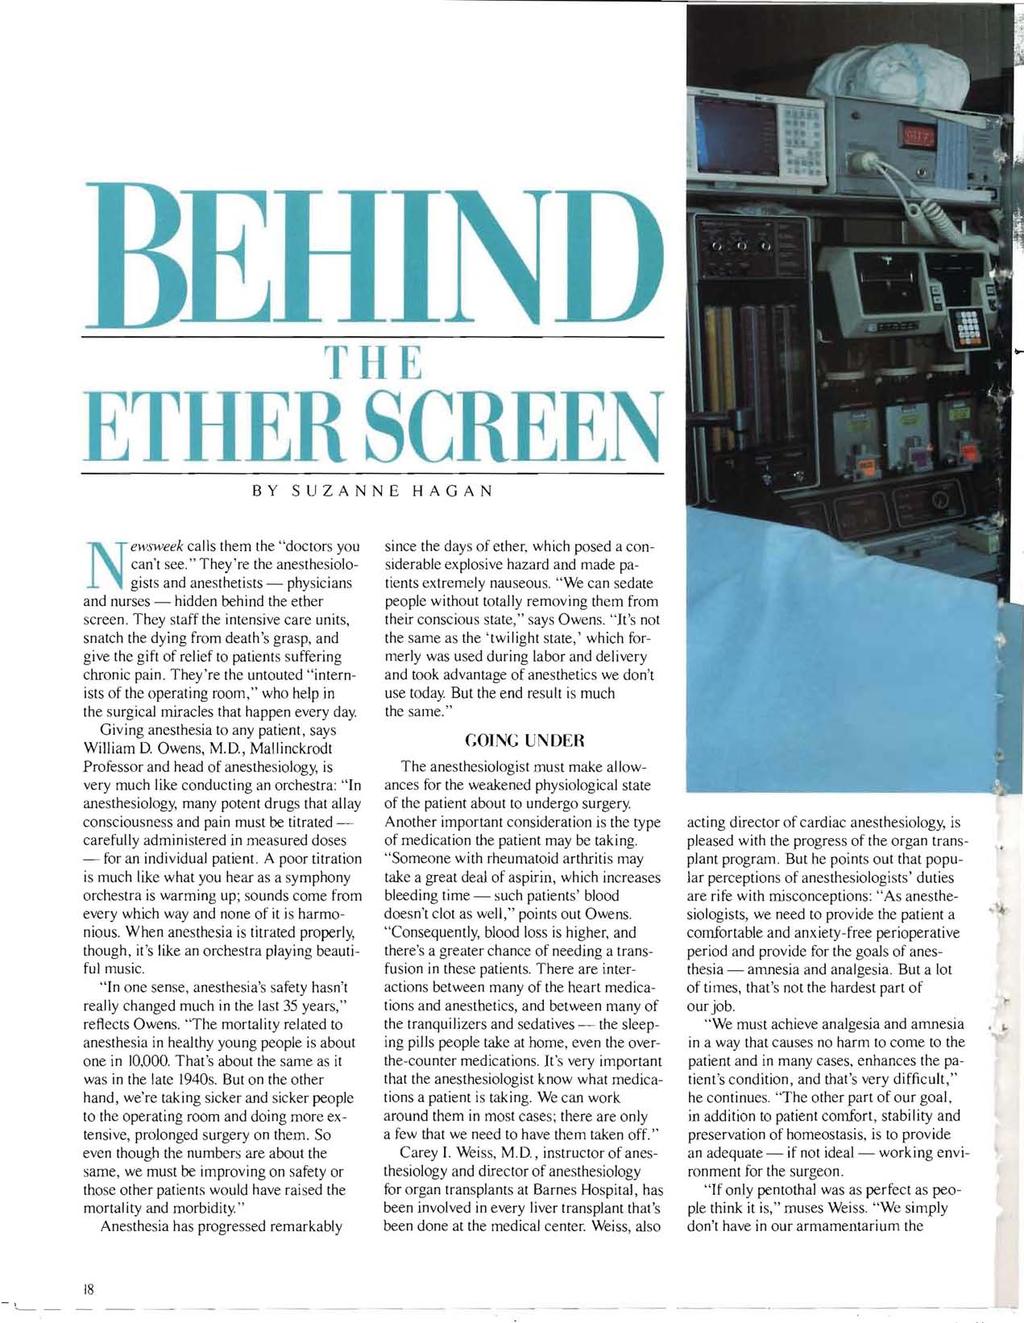 TlIE ETHER SCREEN BY SUZANNE HAGAN Newsweek calls them the "doctors you can't see." They're the anesthesiologists and anesthetists - physicians and nurses - hidden behind the ether screen.